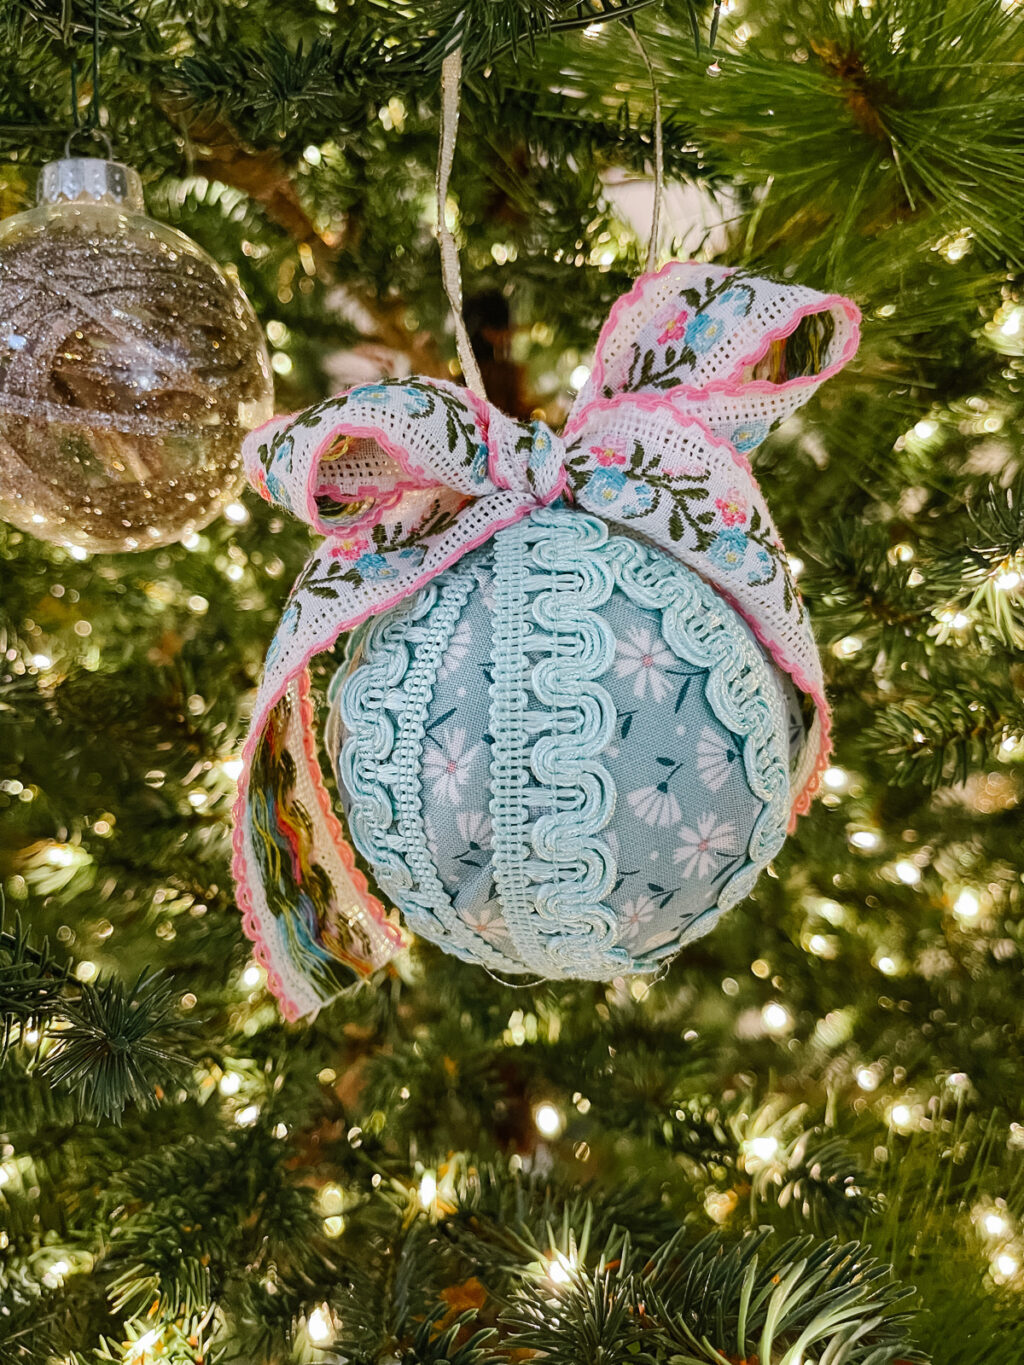 How To Make A Scrap Fabric Tree Ornament ⋆ A Rose Tinted World